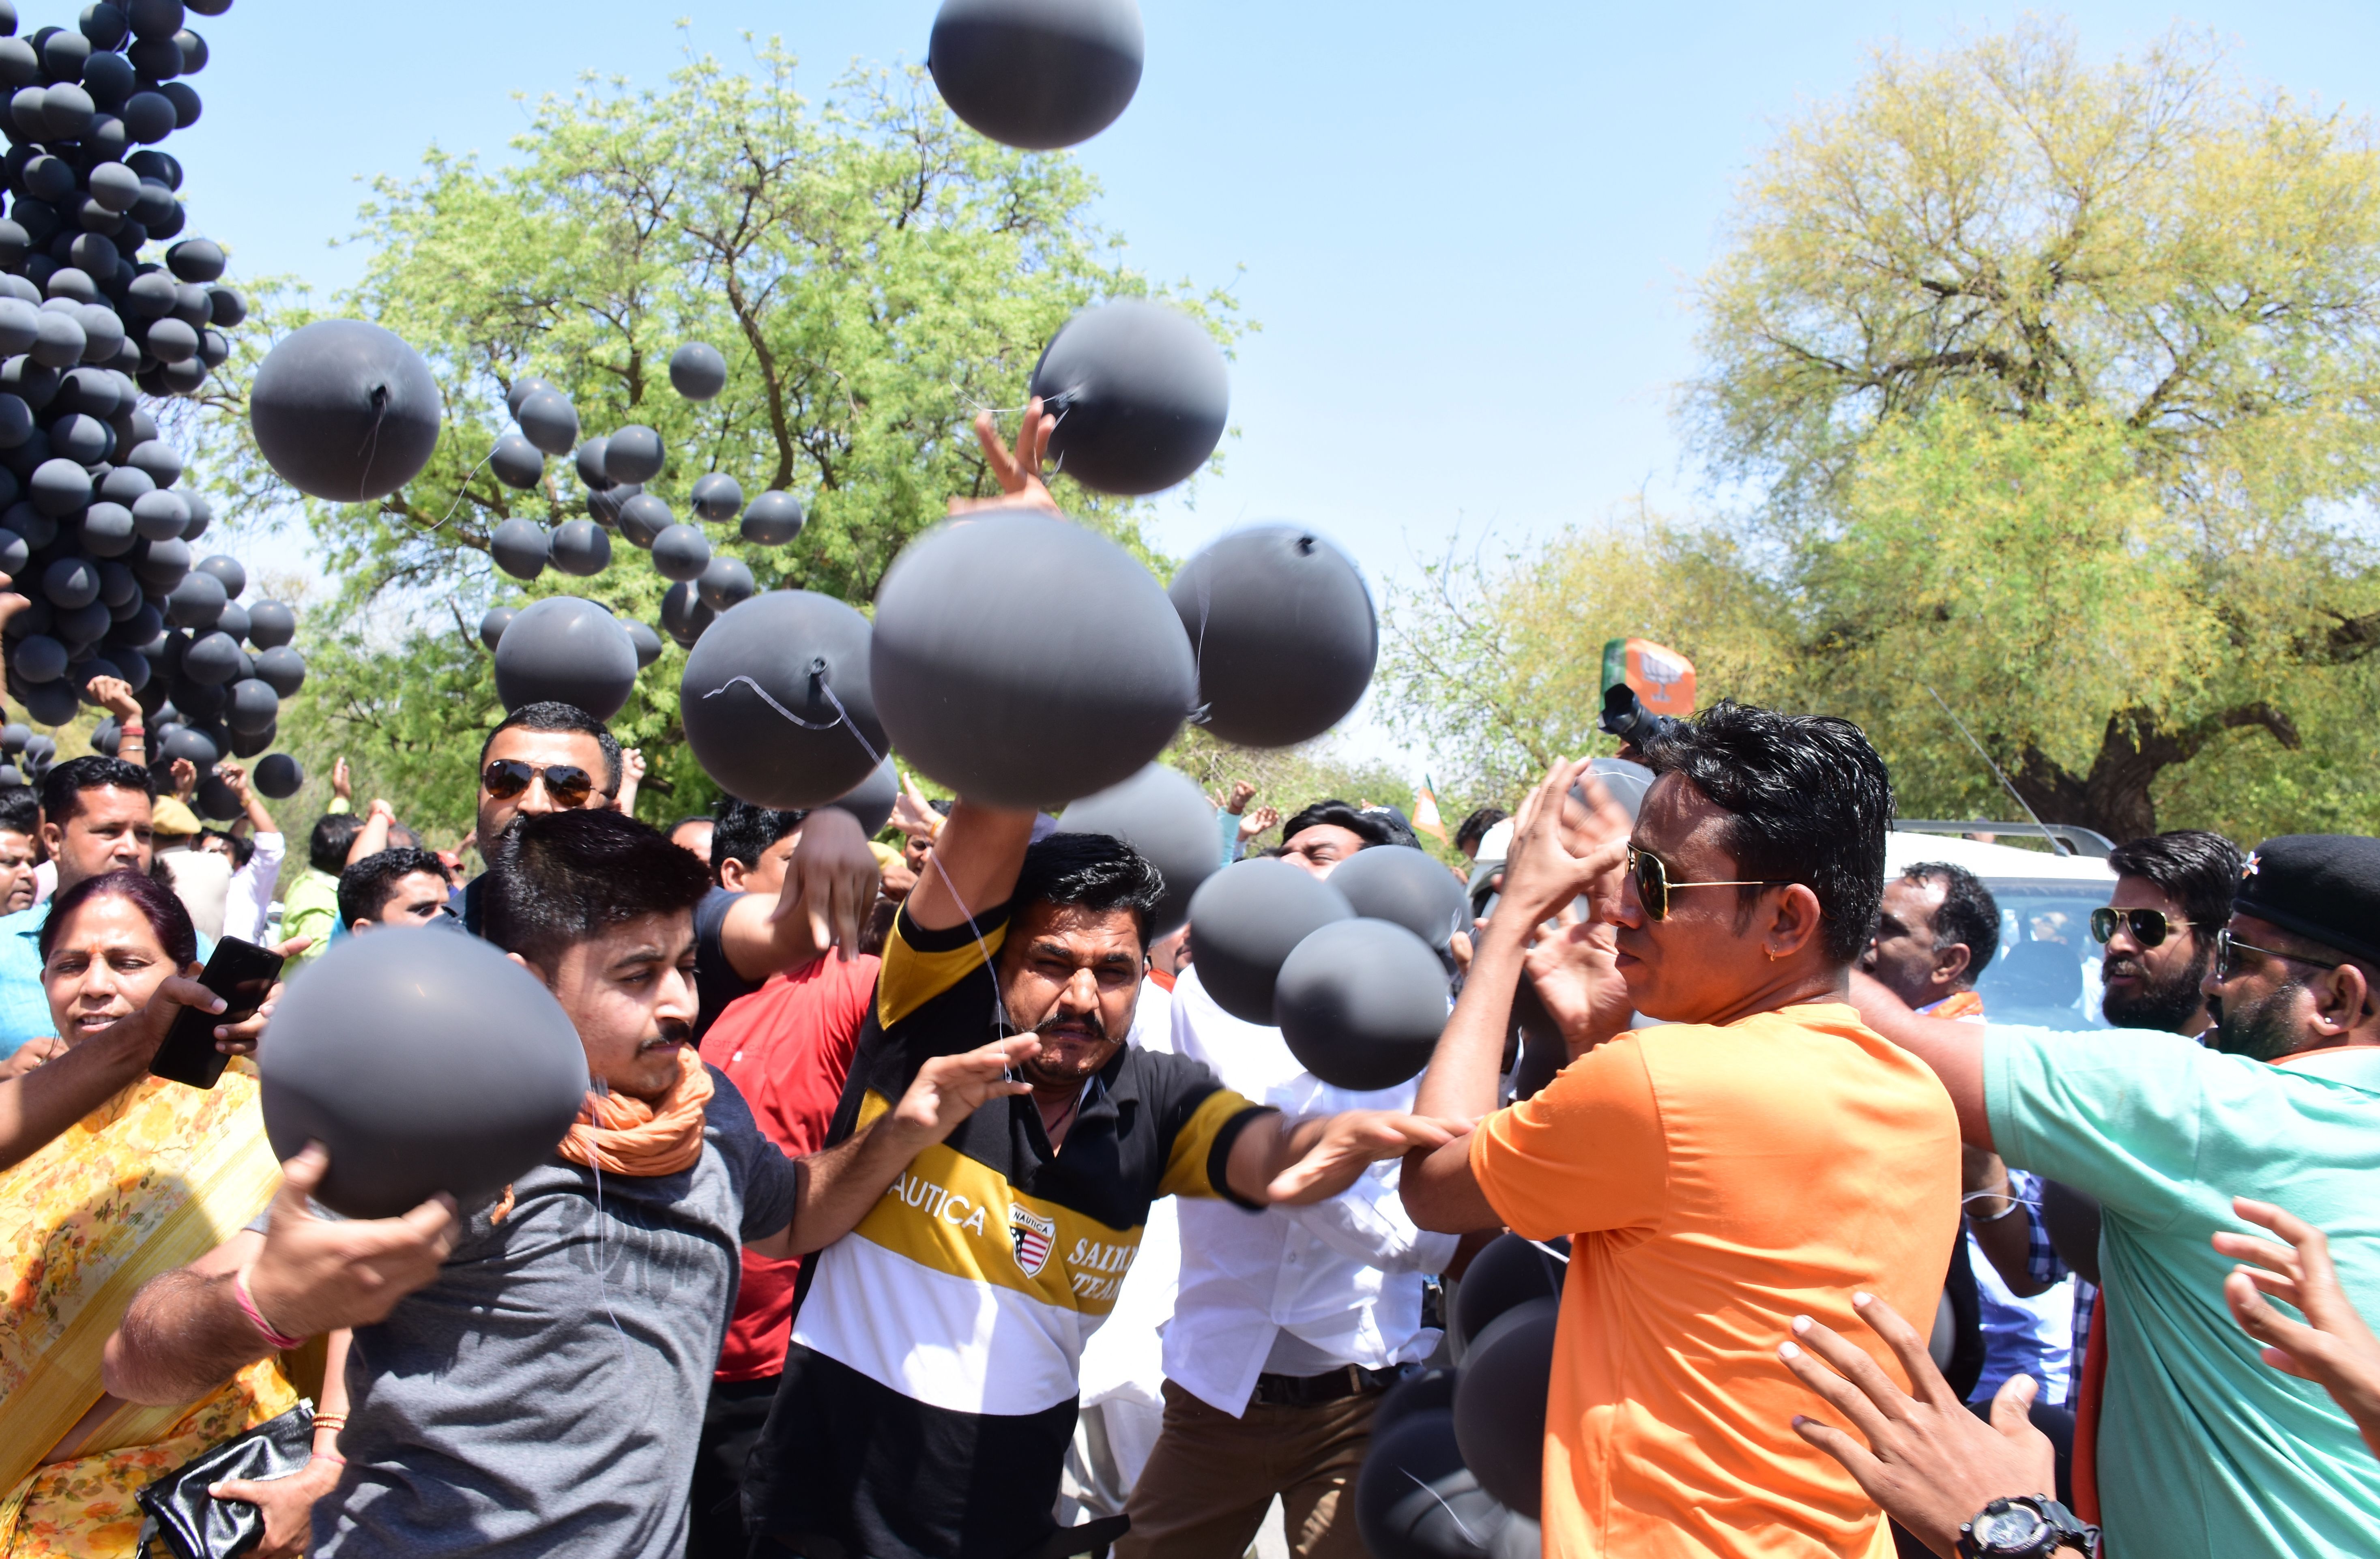 Black balloons flying in front of the Collectorate, wandering black fl